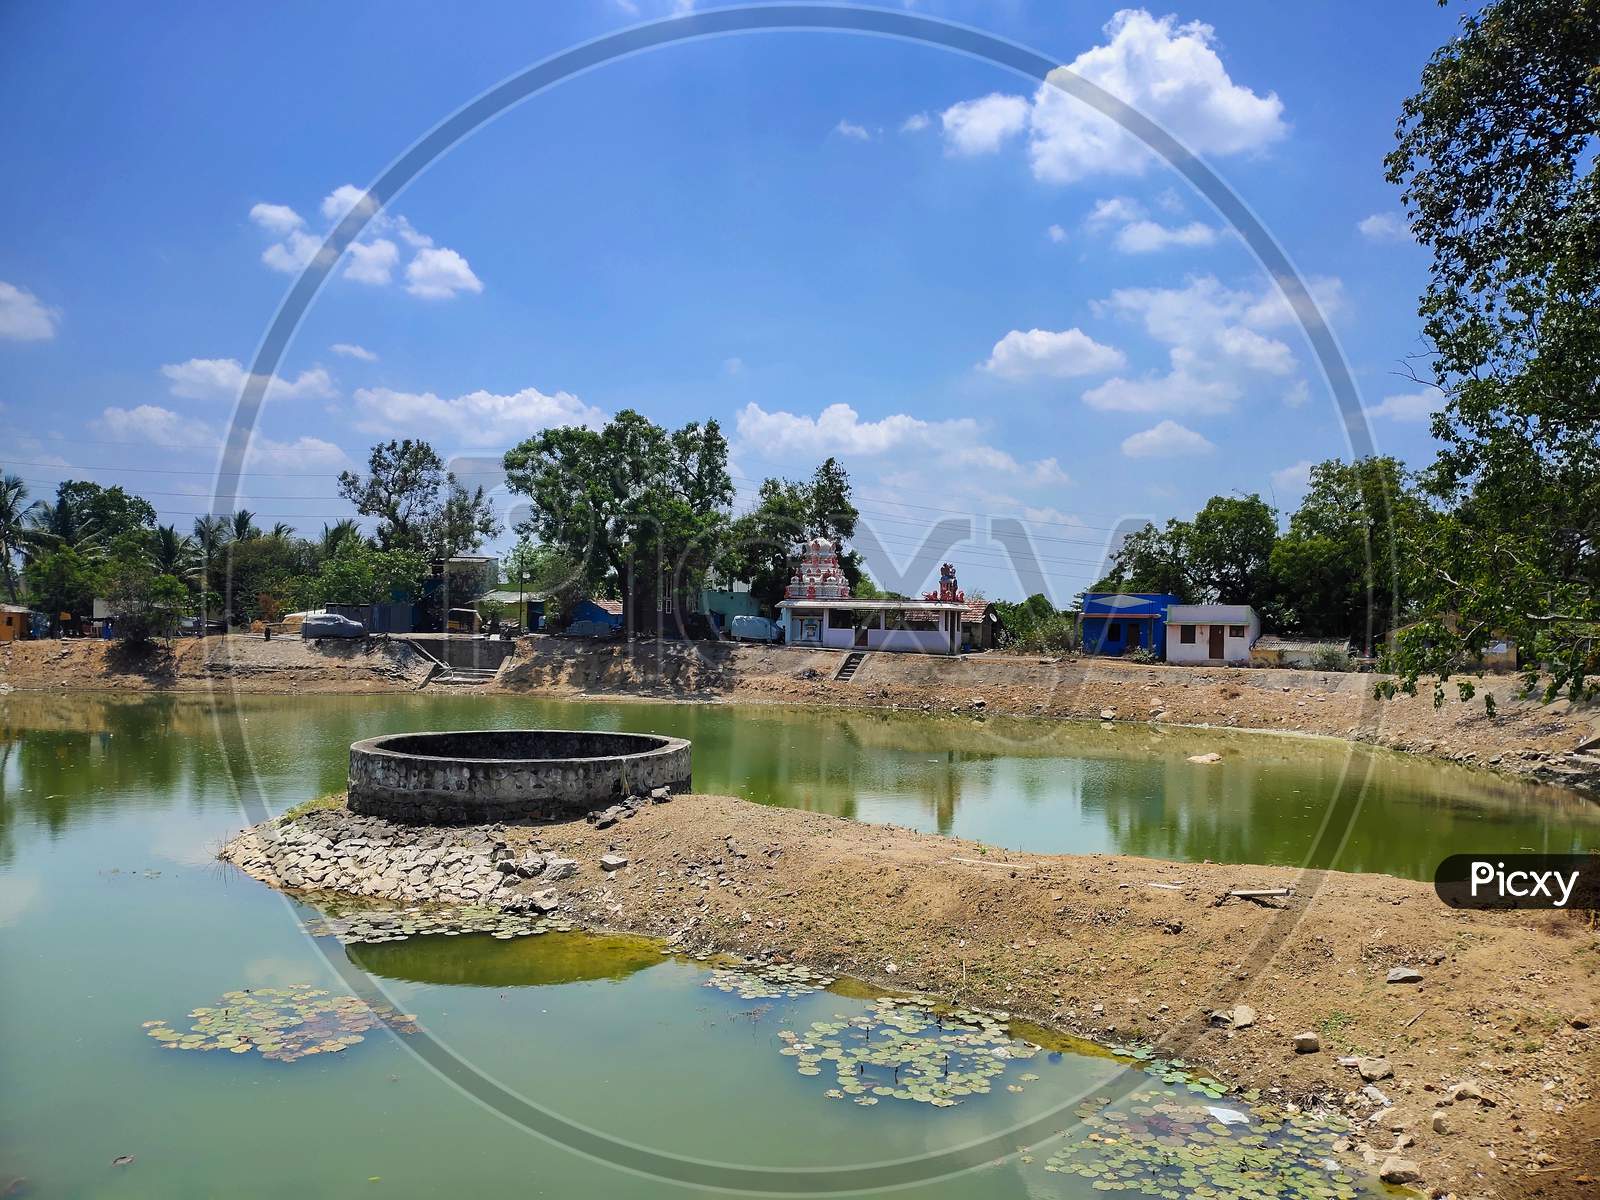 Village Water Well Located On Pond.The Large Diameter Water Well On The Center Of The Temple Pond In Indian Village.